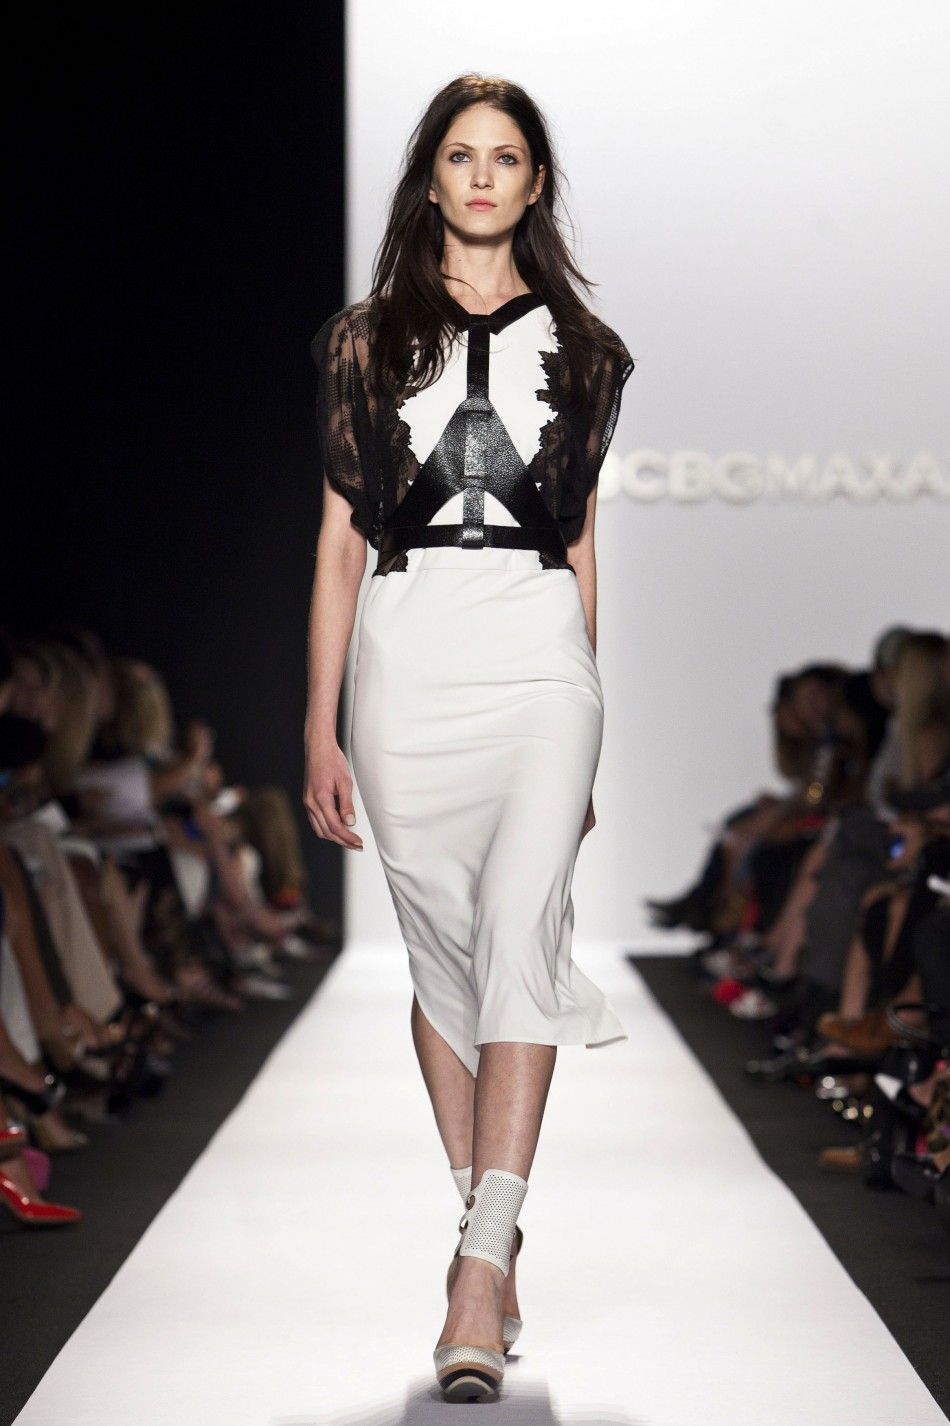 A model presents a creation from the BCBGMAXAZRIA Spring 2013 collection during New York Fashion Week on September 6, 2012. 